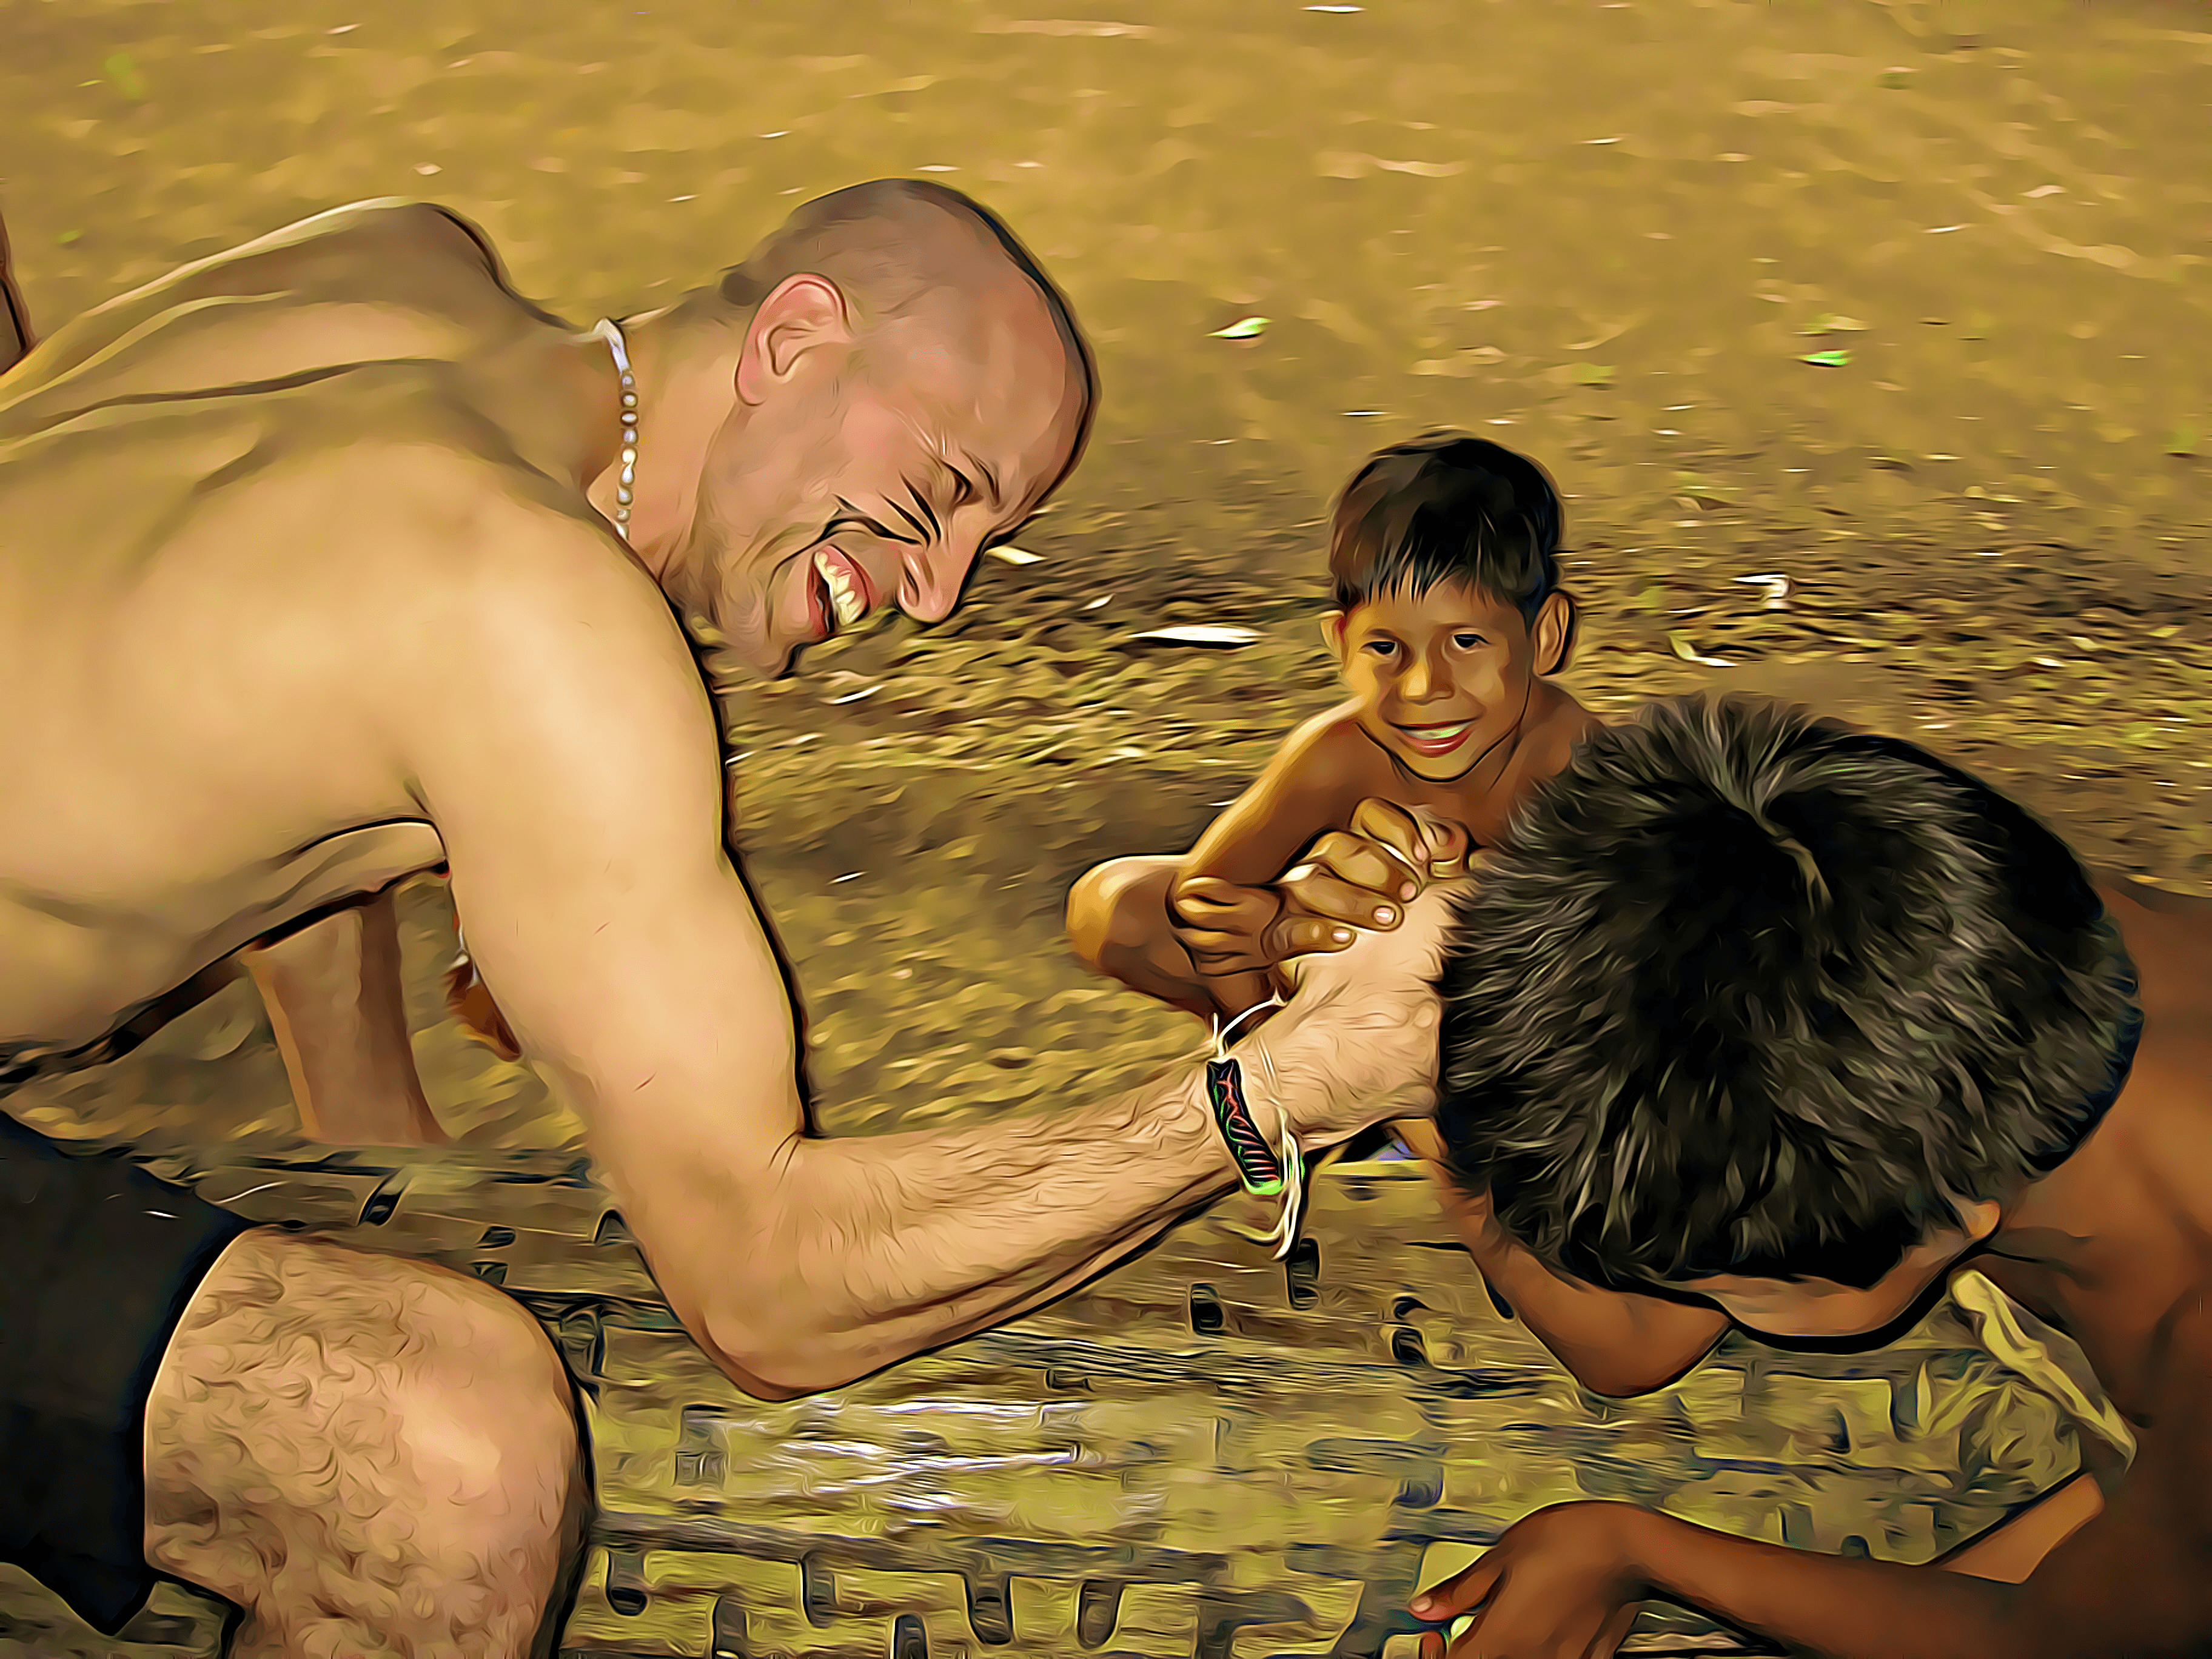 Arm Wrestling with Bora Tribe Kids in Iquitos, Peru